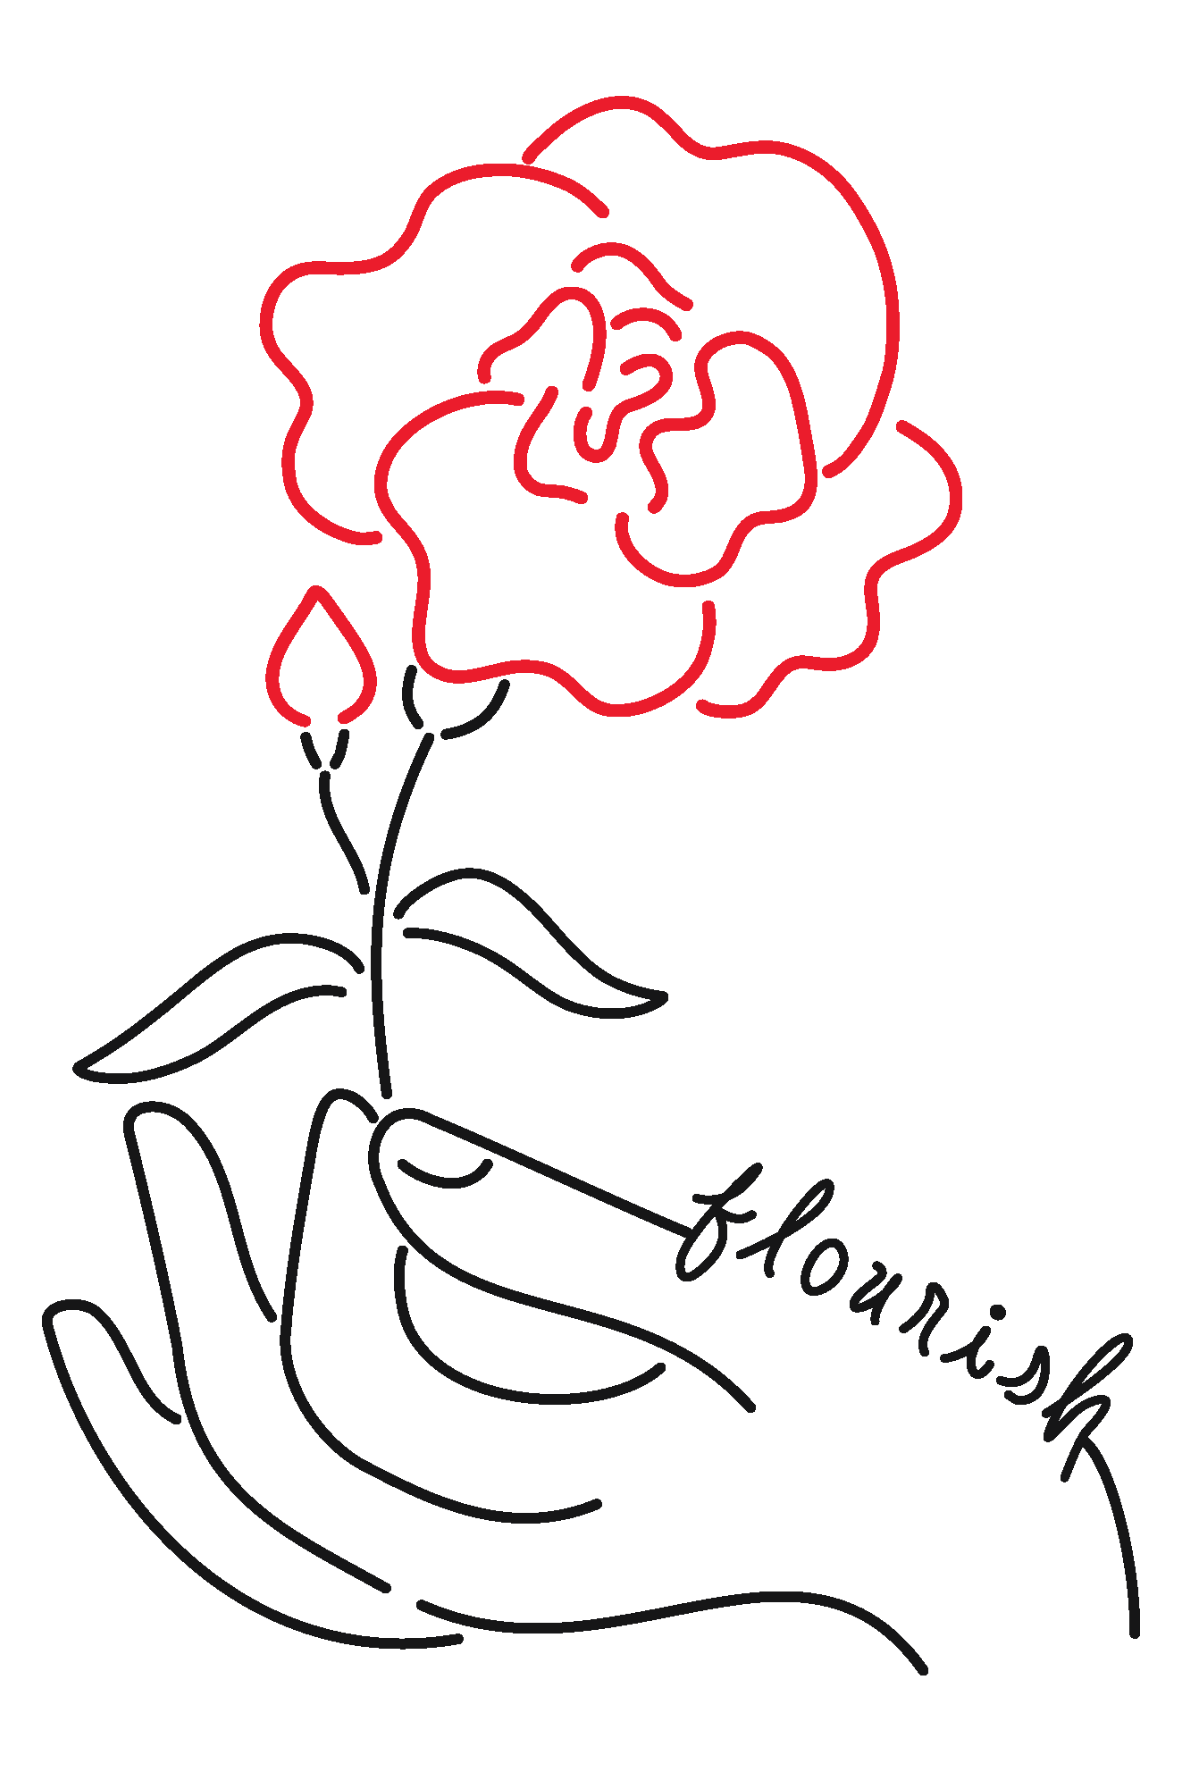 Drawing of a hand holding a rose with the word "flourish."